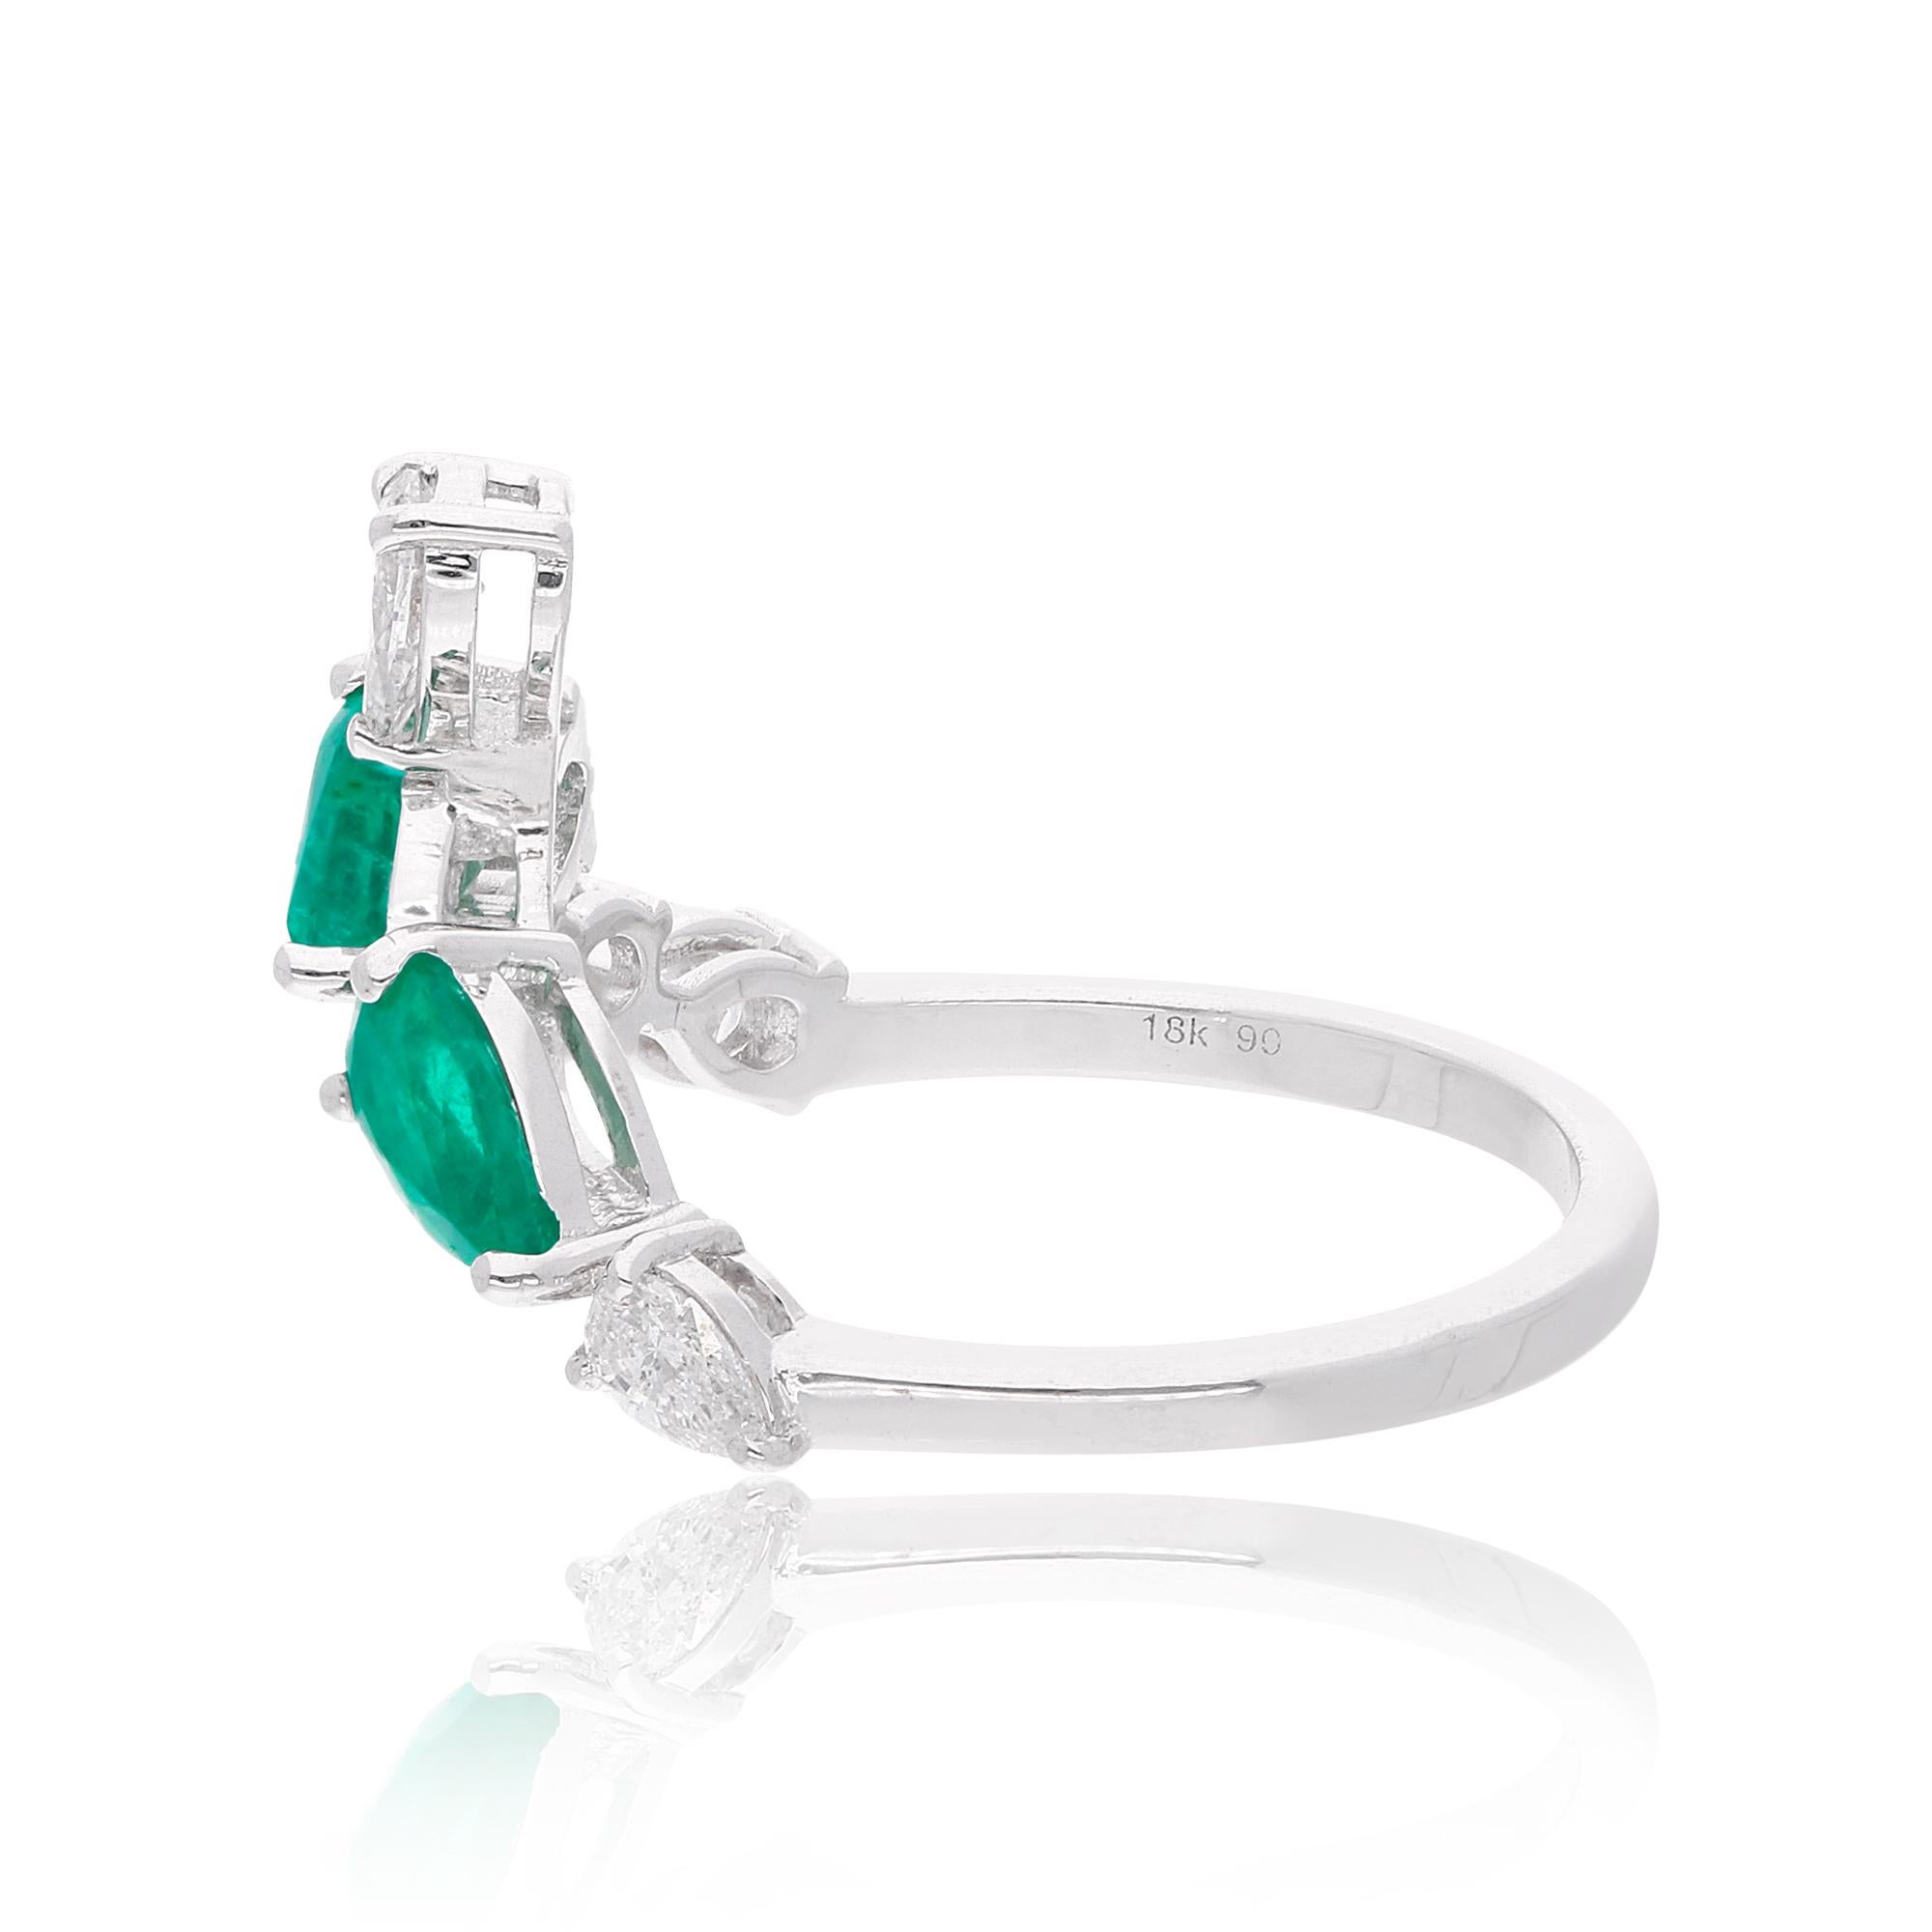 Item Code :- SER-22462
Gross Wt. :- 3.08 gm
18k White Gold Wt. :- 2.79 gm
Natural Diamond Wt. :- 0.58 Ct. ( AVERAGE DIAMOND CLARITY SI1-SI2 & COLOR H-I )
Emerald Wt. :- 0.85 Ct.
Ring Size :- 7 US & All size available


✦